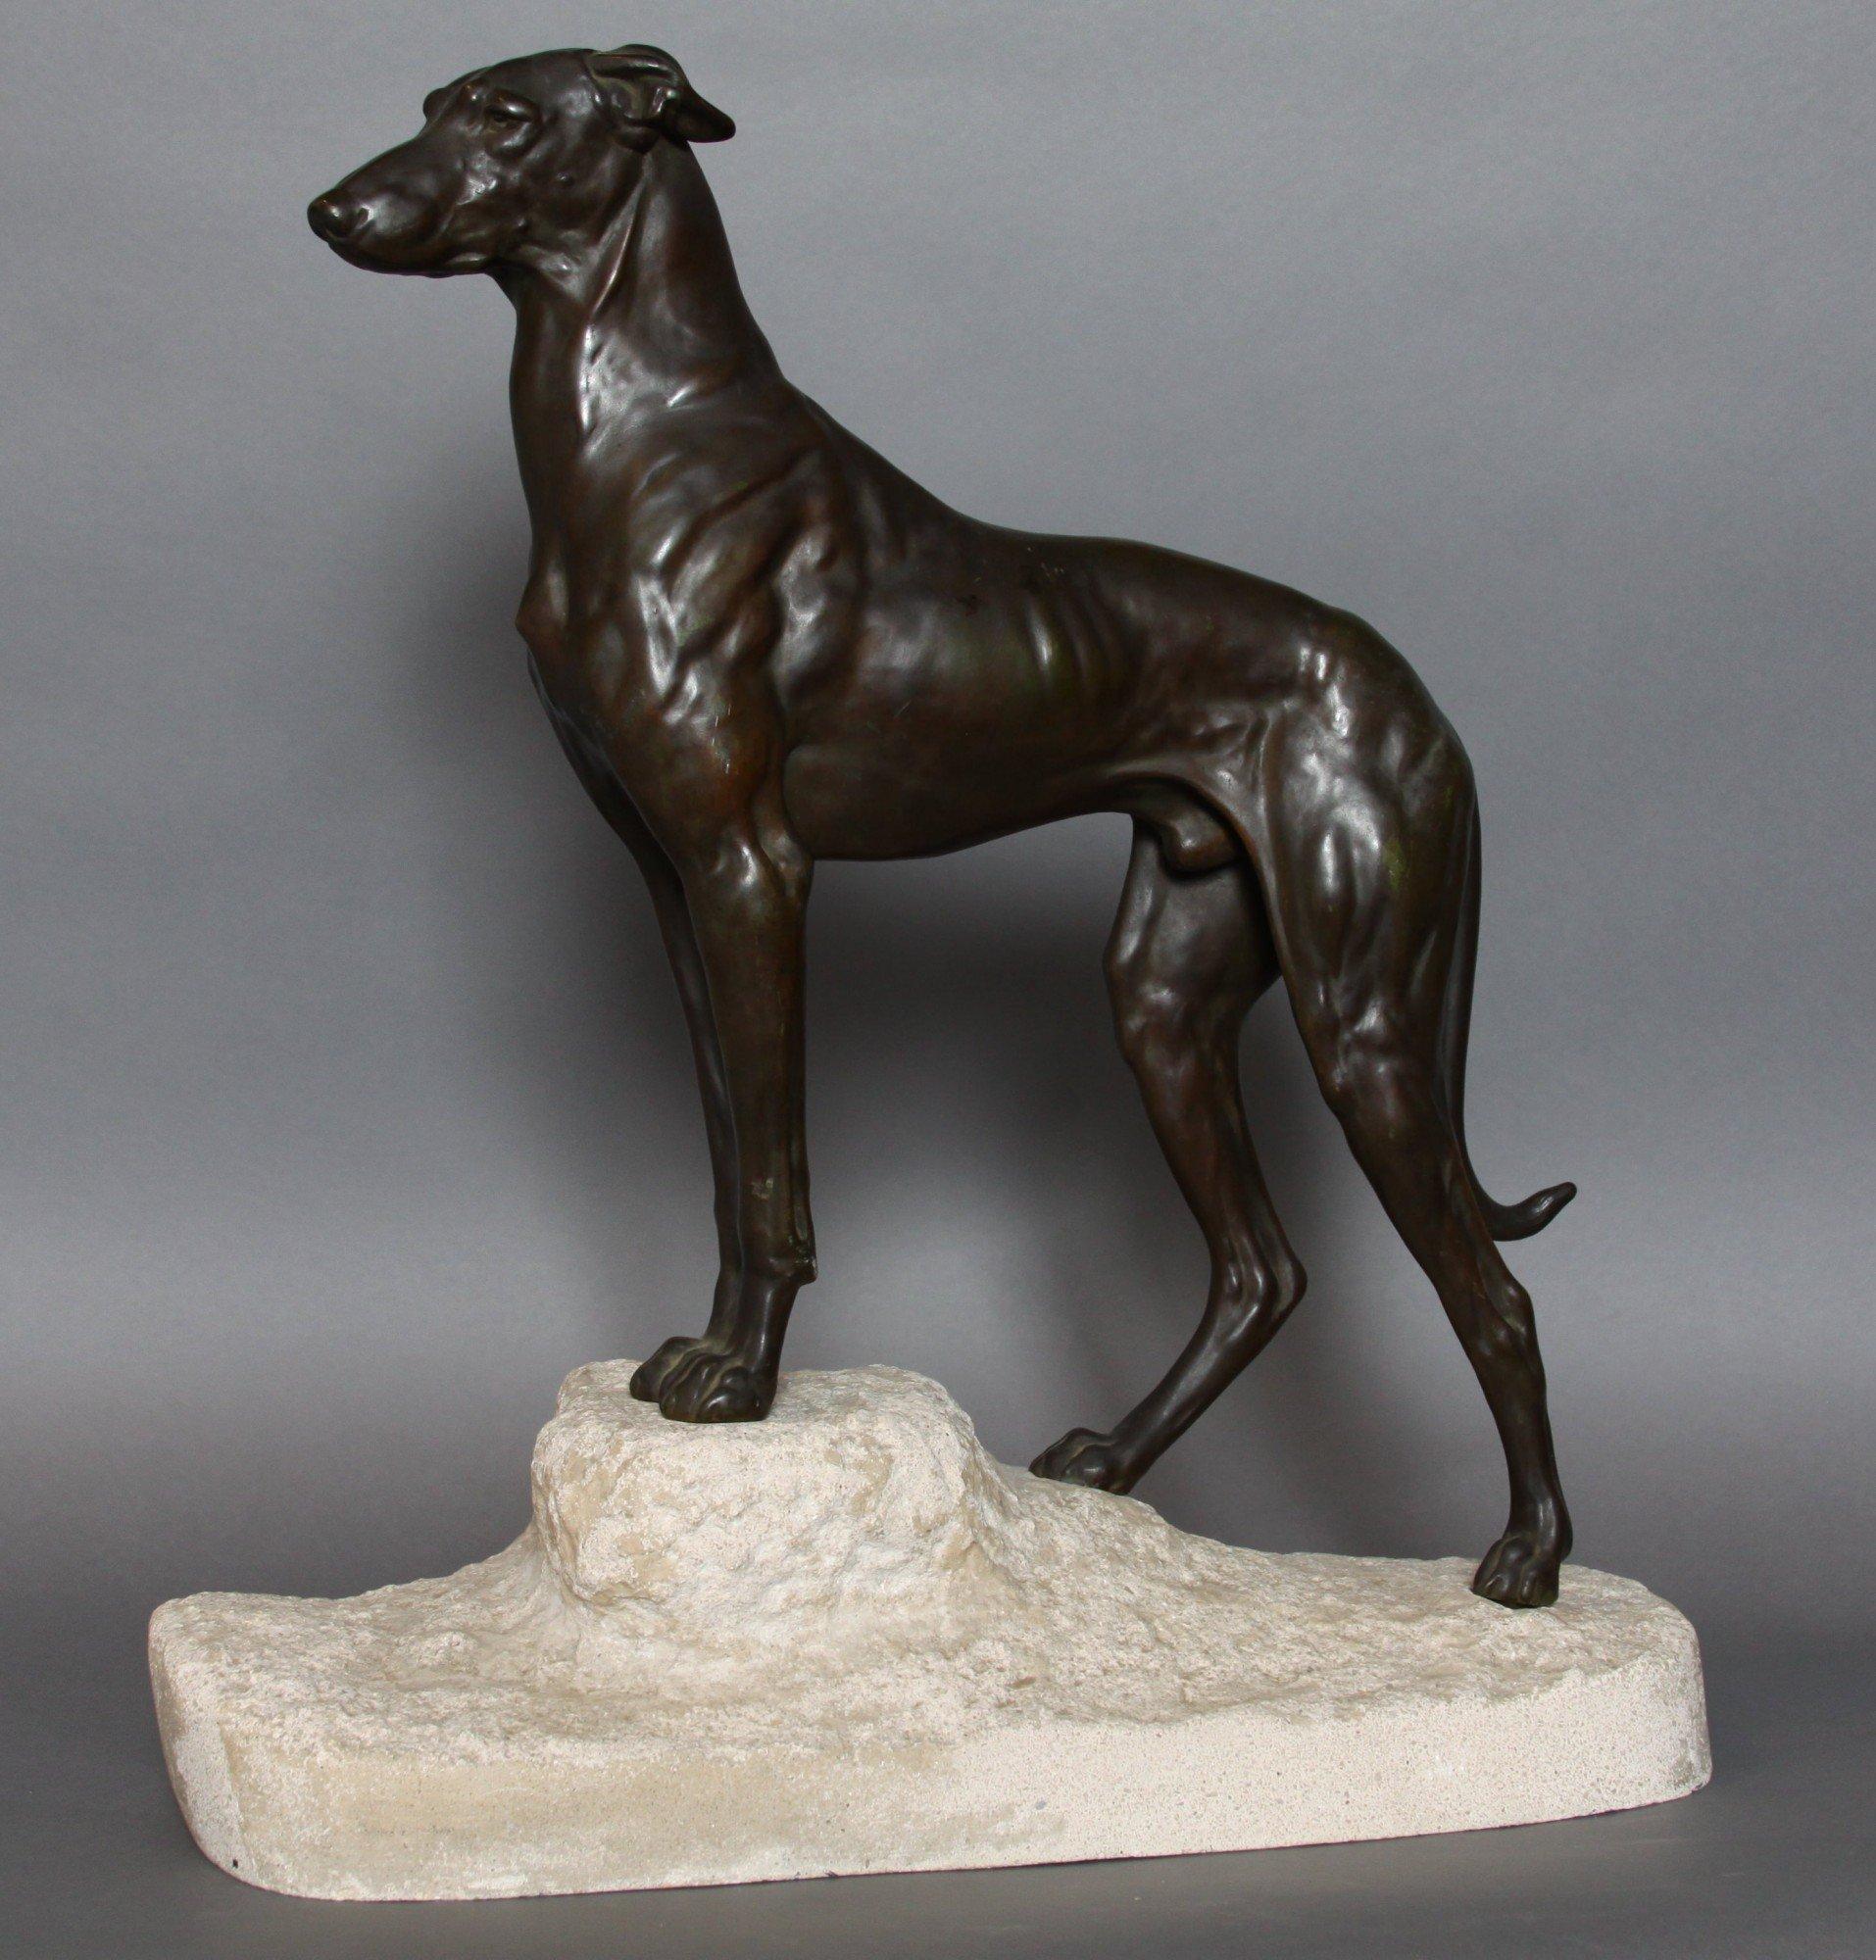 1930 French Bronze Figure of a Lurcher Dog on Stone Base - Sculpture by Jules Edmond Masson